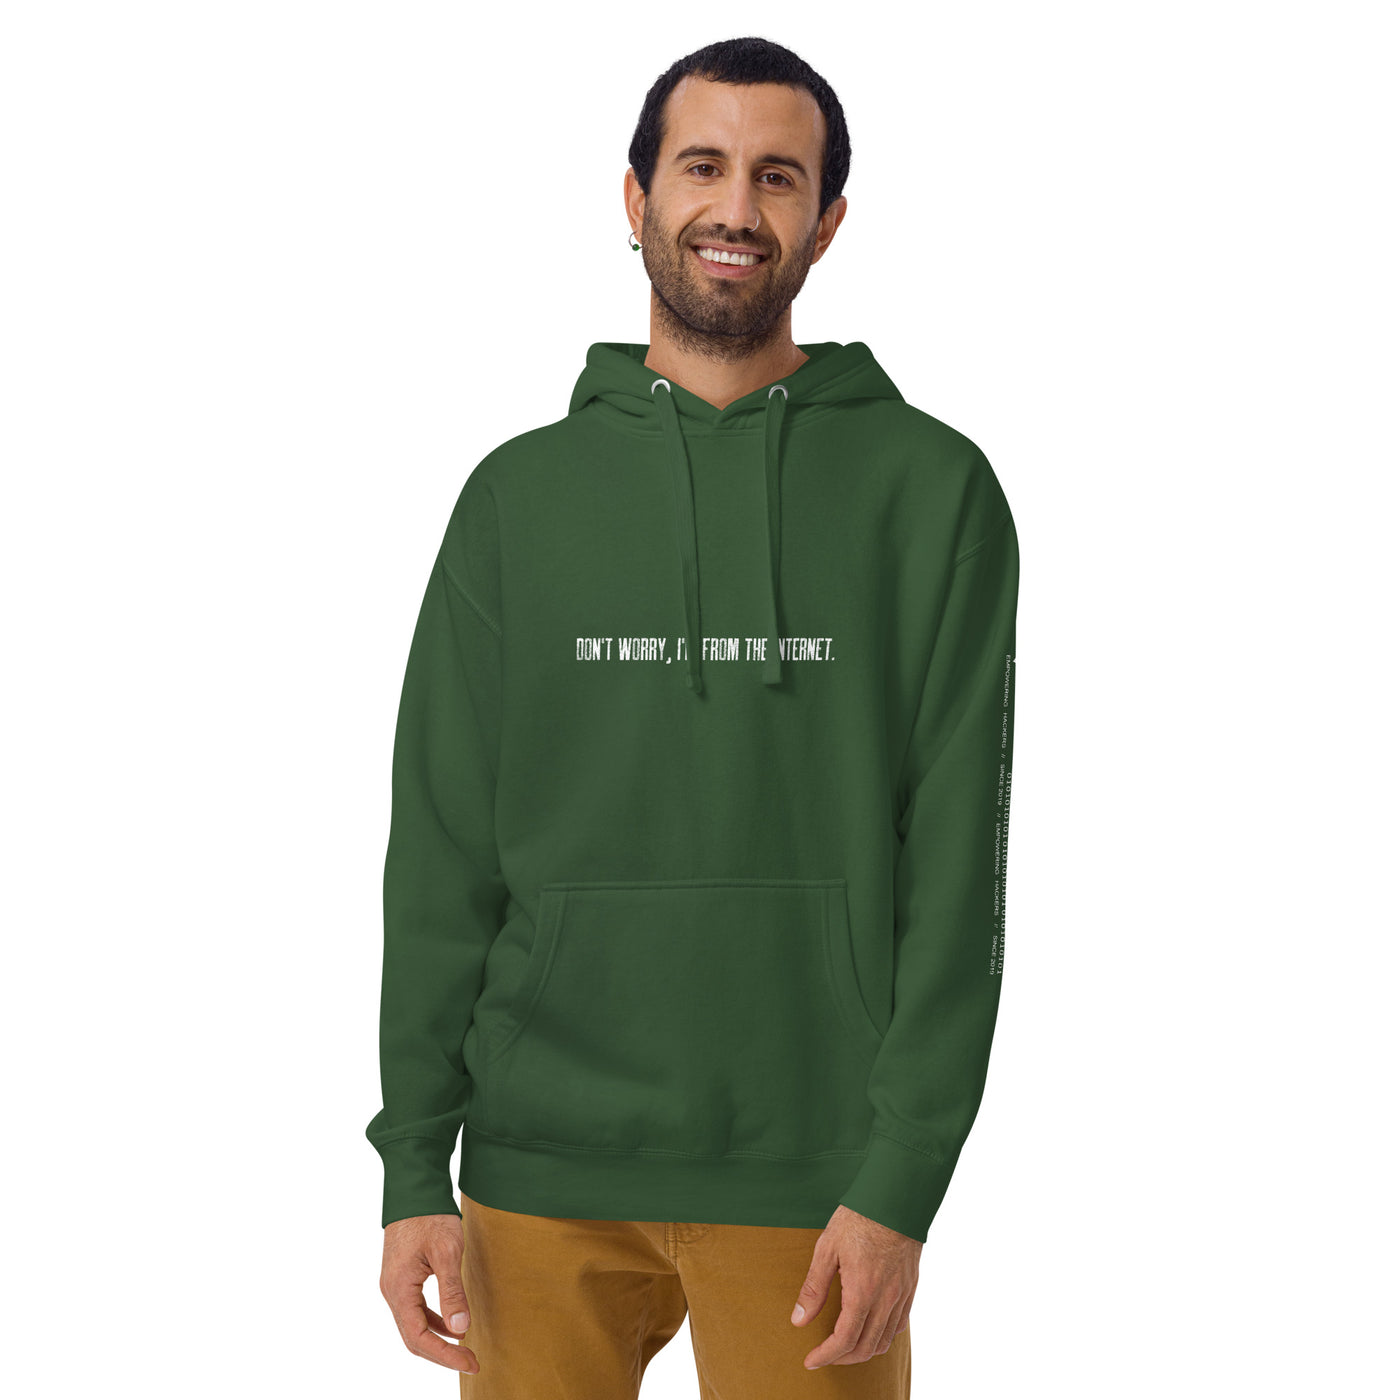 Don't worry I am from the Internet V2 - Unisex Hoodie